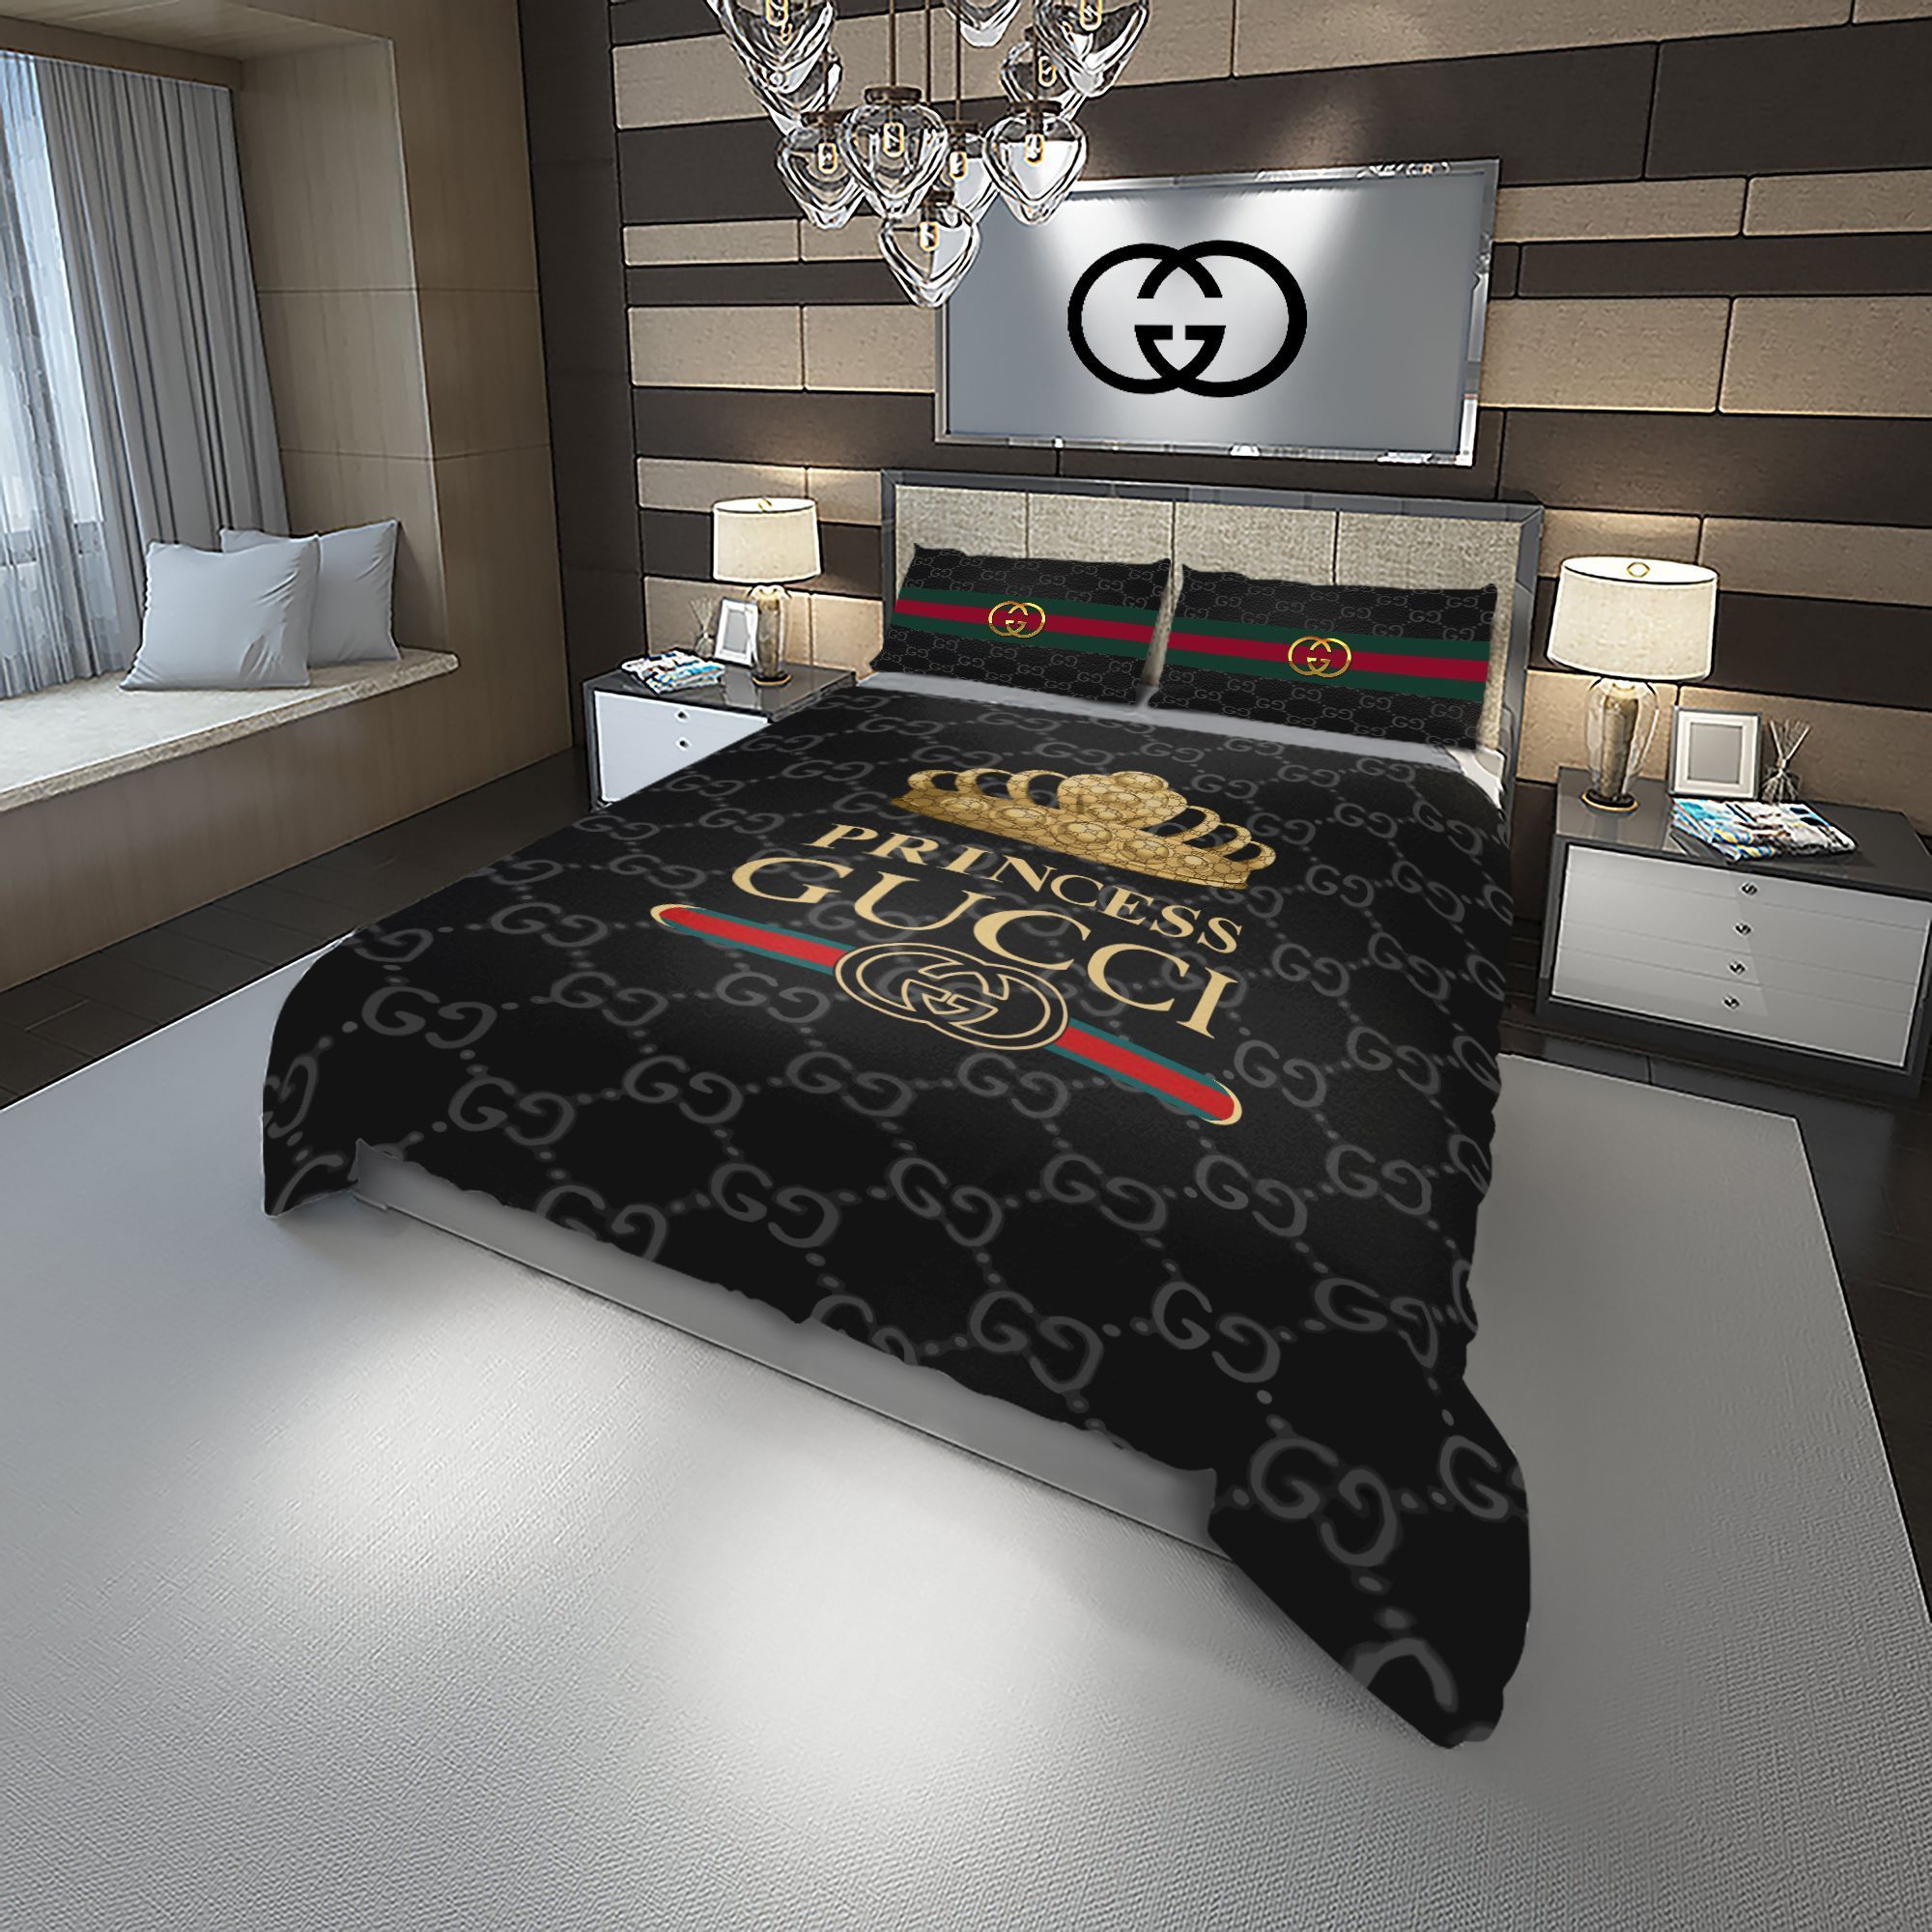 Let me show you about some luxury brand bedding set 2022 108